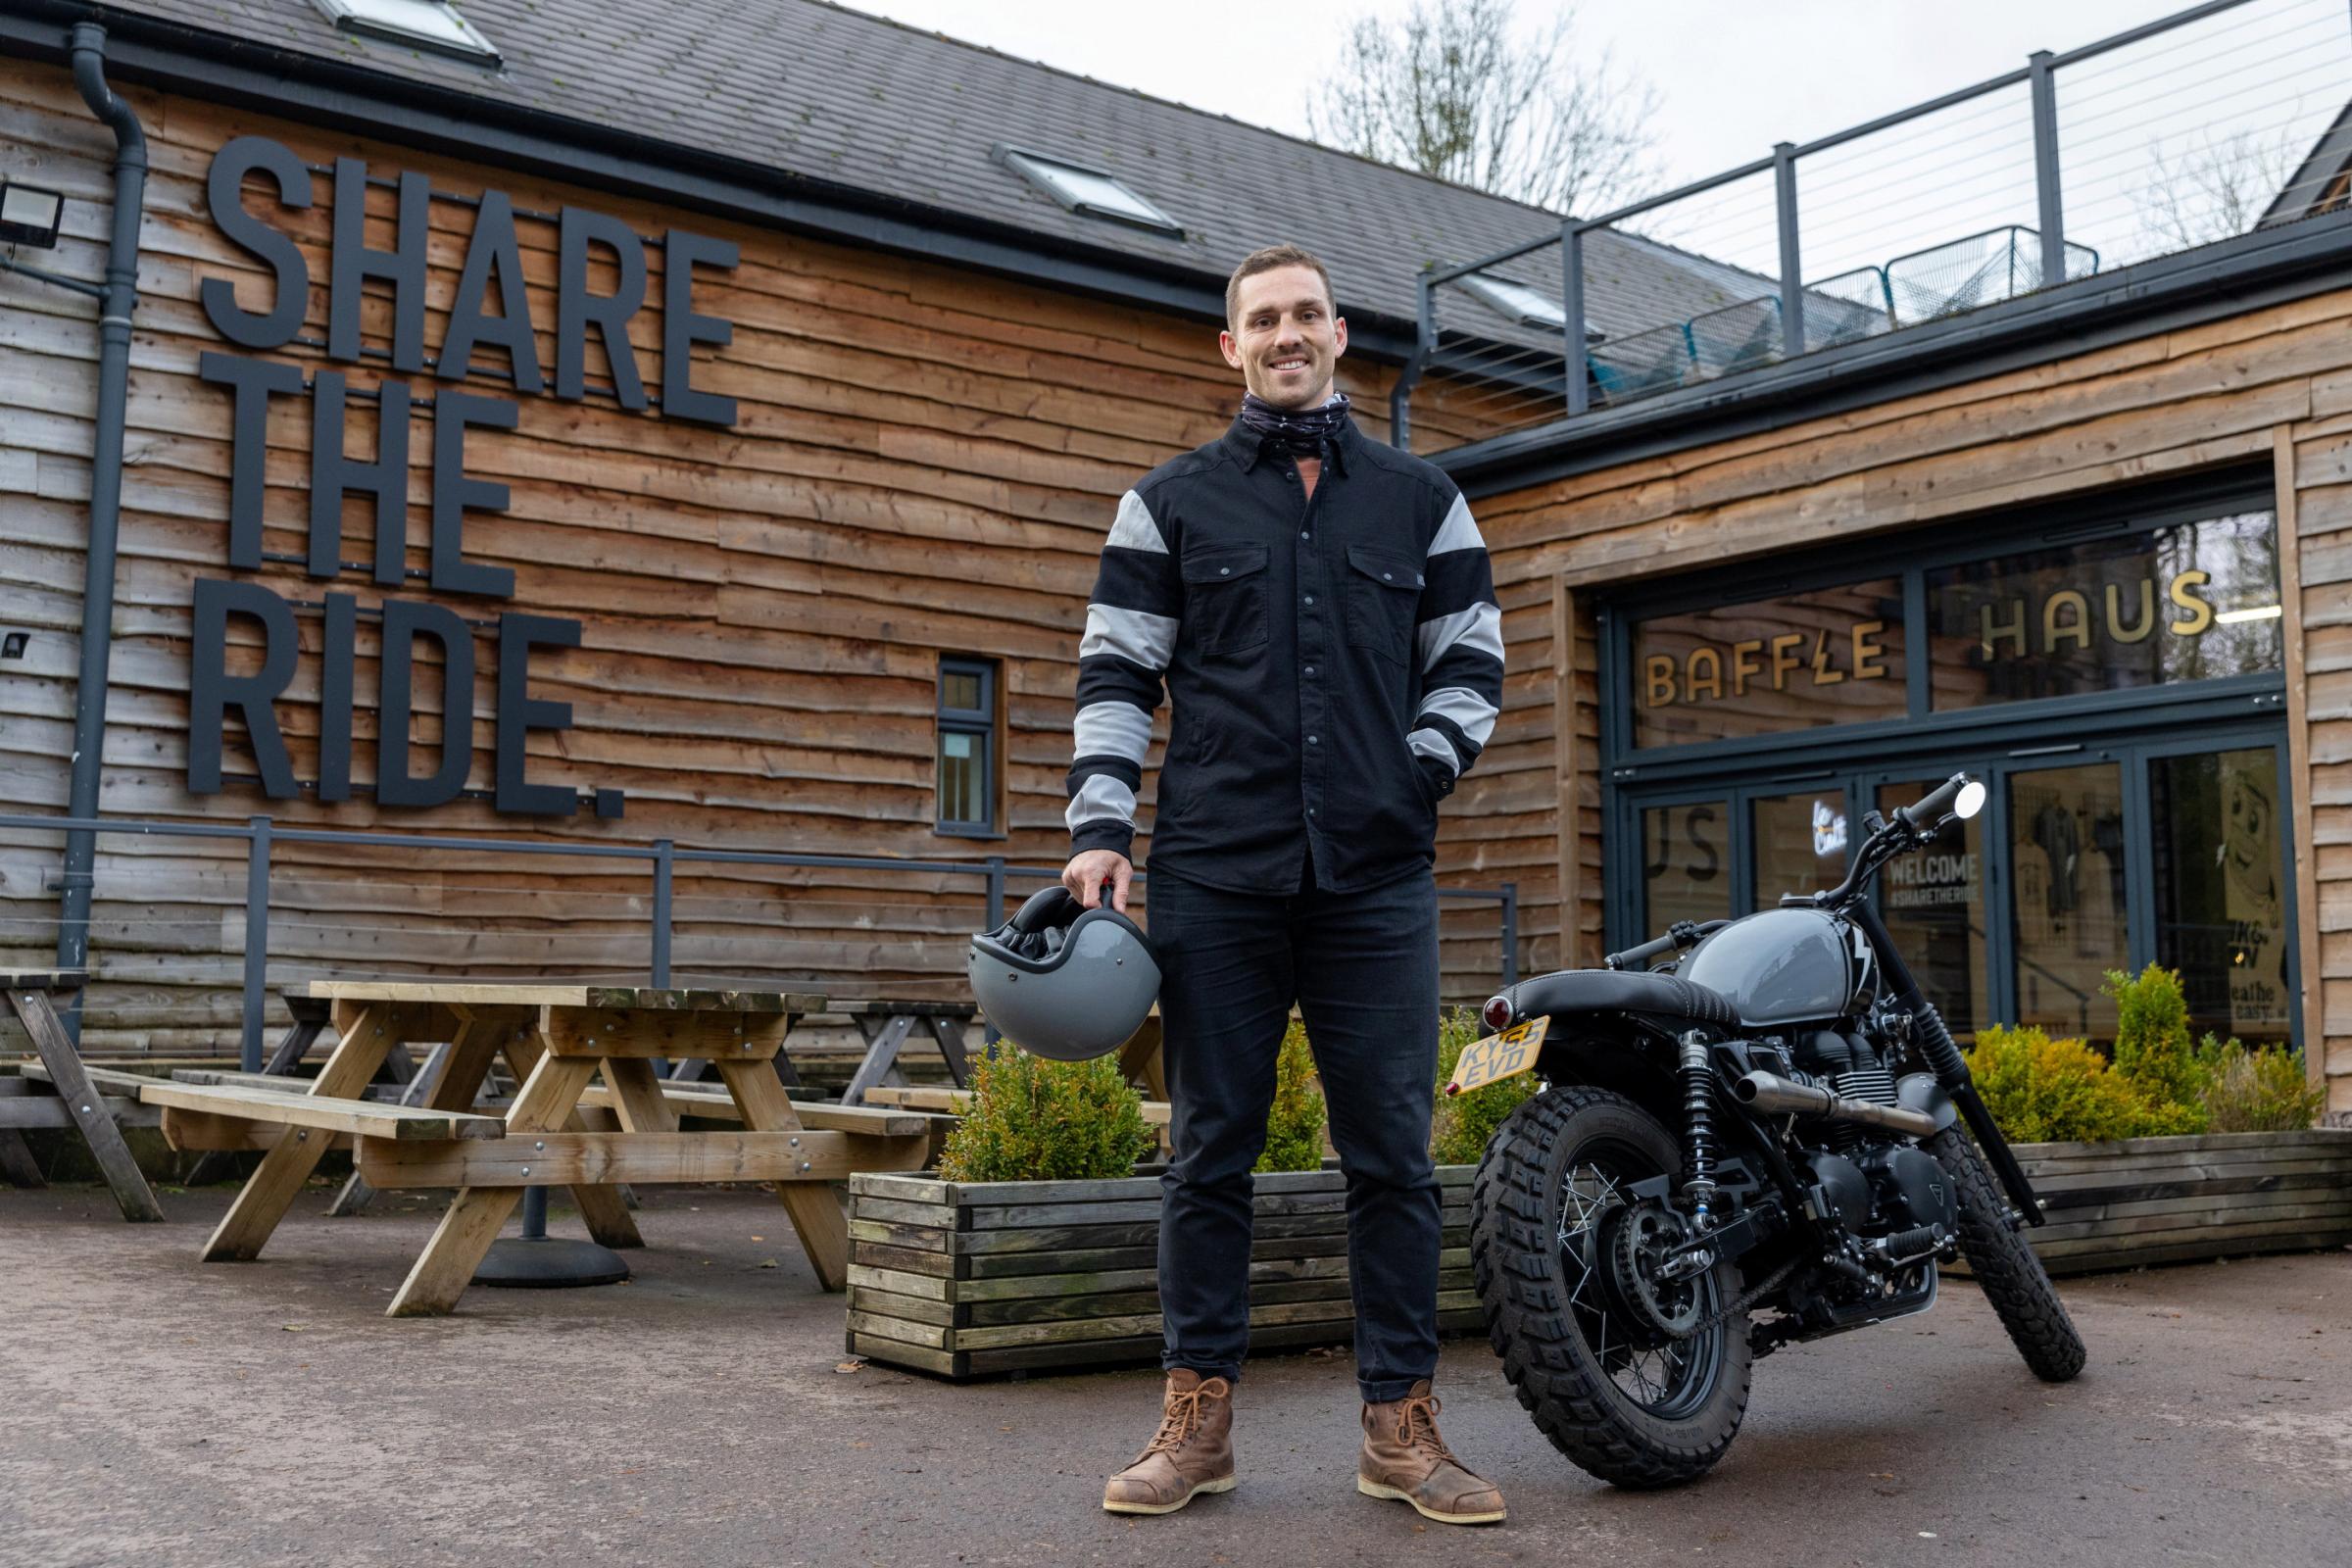 George North. Sports stars turned small business owners have revealed how a sporting mentality can help give an edge in the business world. Photo: SWNS